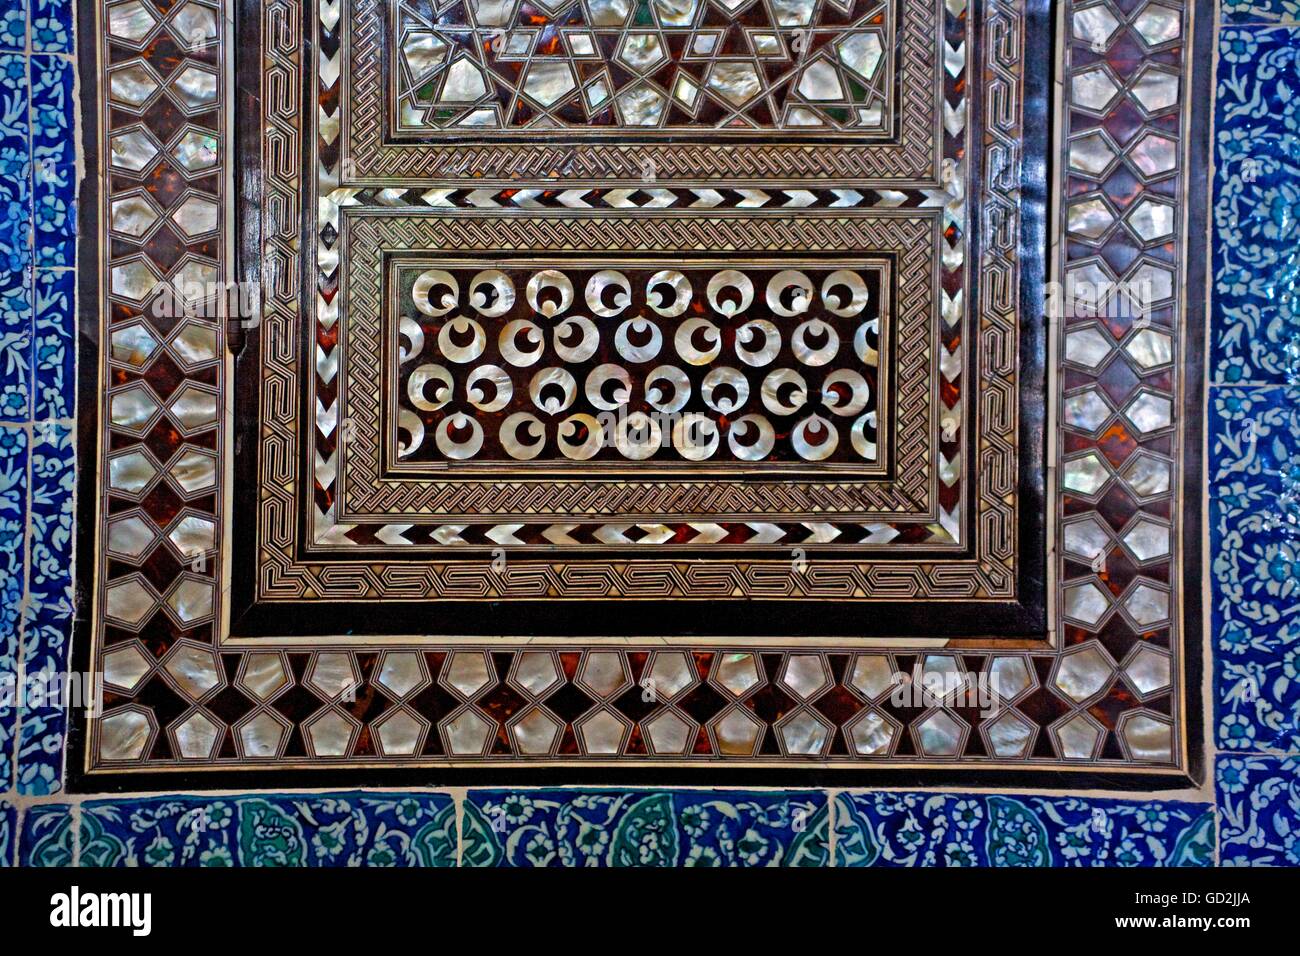 fine arts, Byzantine Empire, ornaments in the Topkapi Palace, Istanbul, Artist's Copyright has not to be cleared Stock Photo